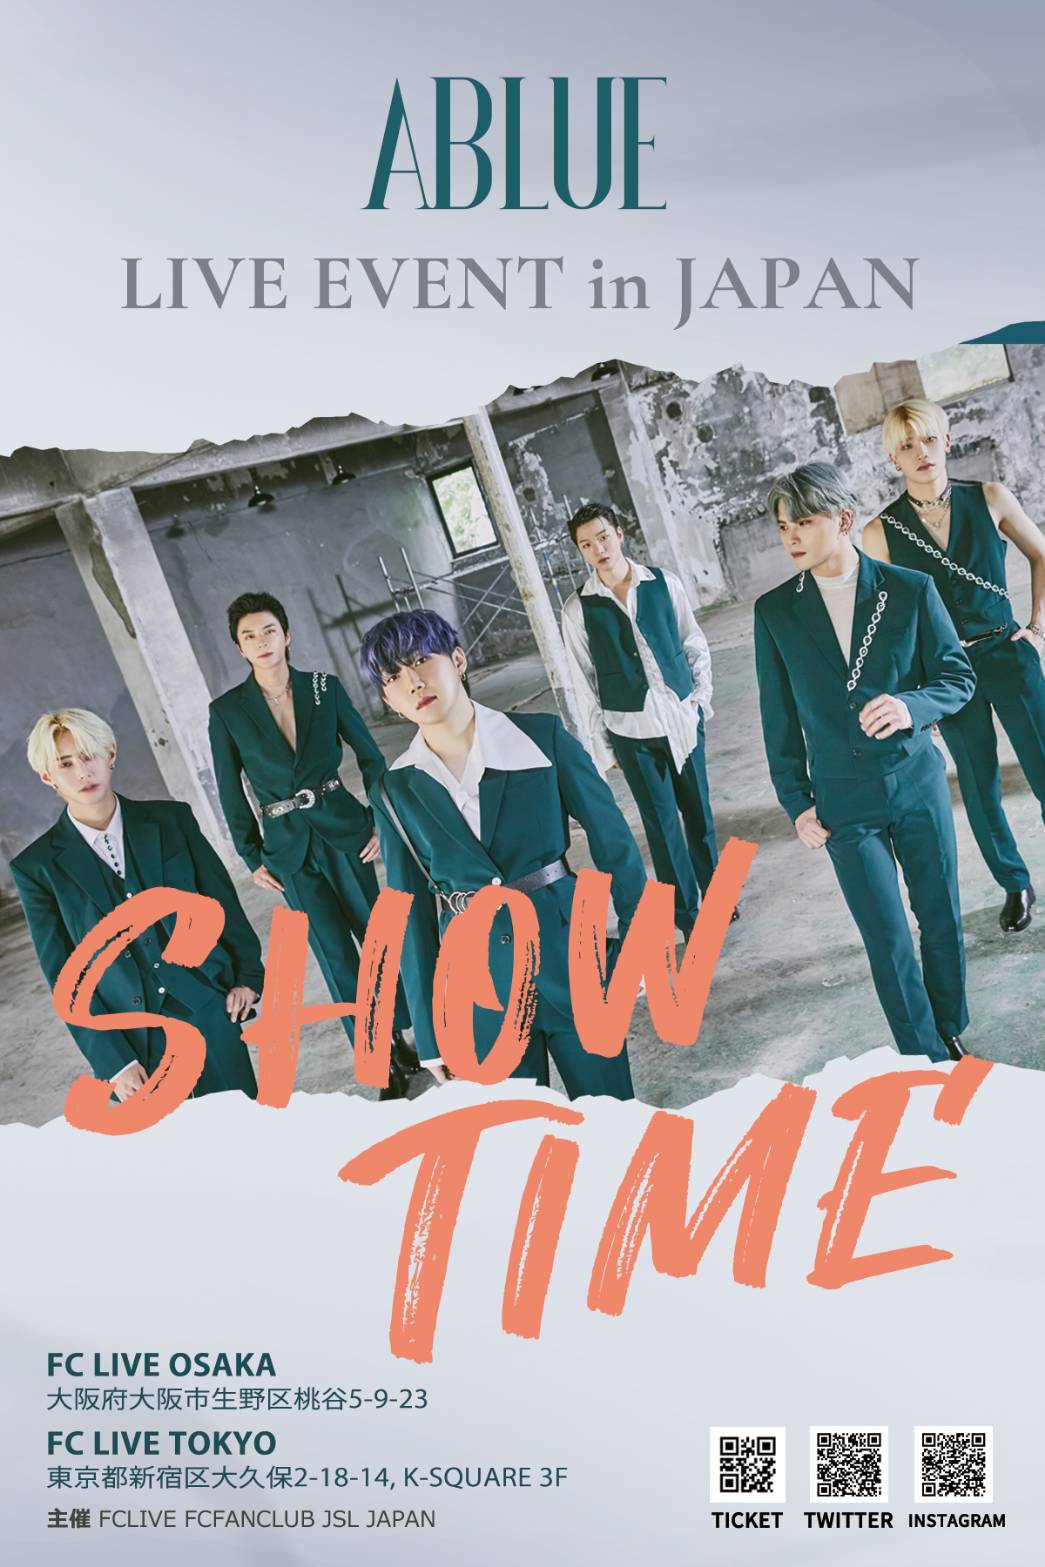 ABLUE LIVE EVENT in JAPAN - 無料DAY